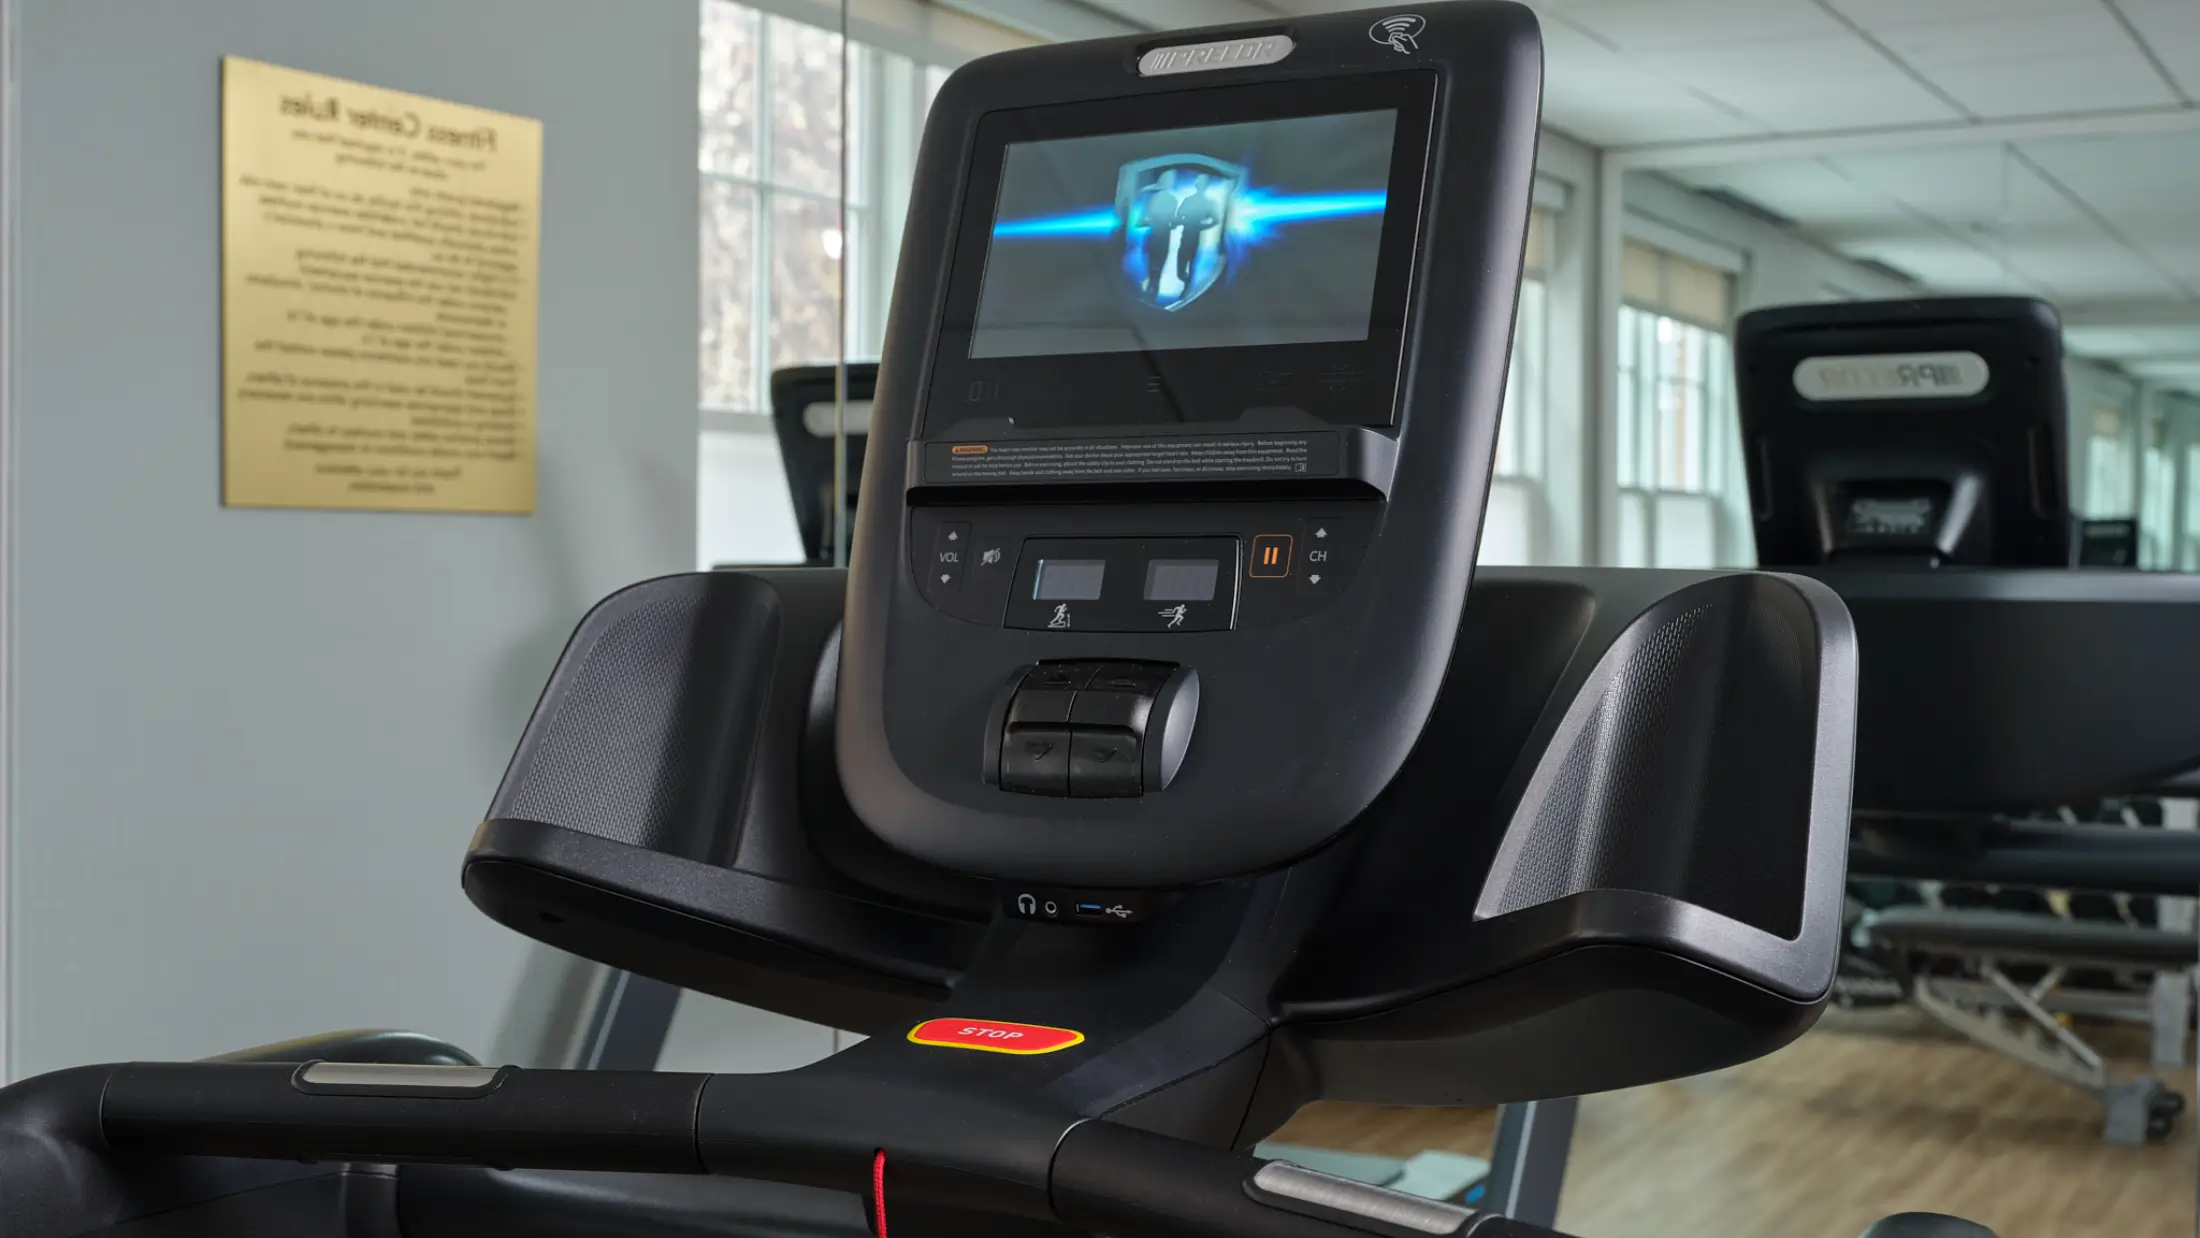 Digital display screen of new Precor equipment in fitness room at Six South St Hotel in Hanover, New Hampshire.